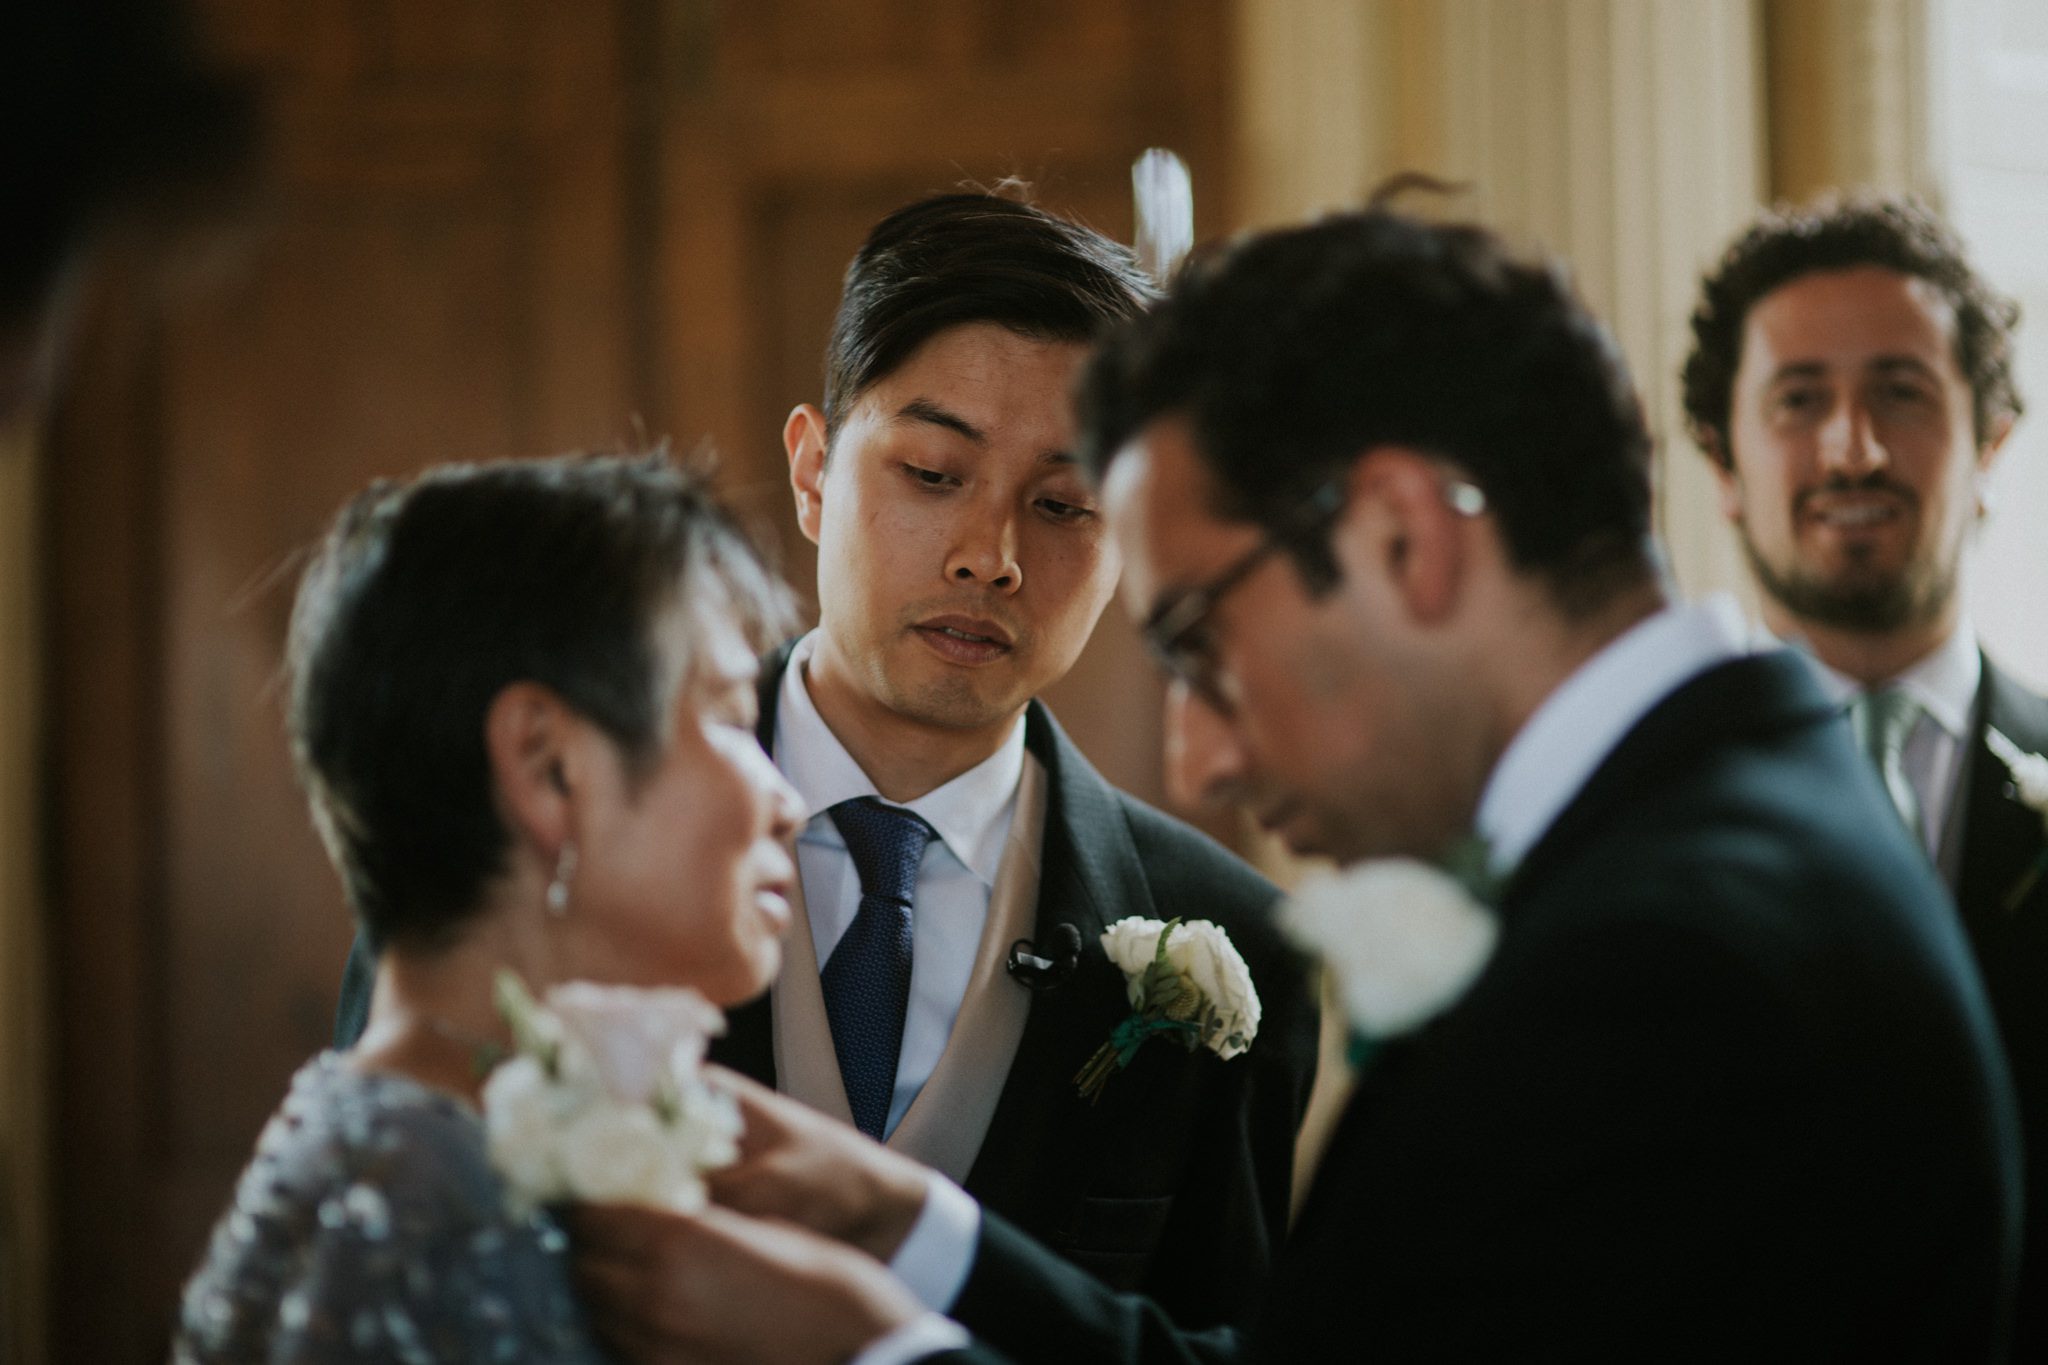 A groomsman pins a corsage to the dress of the groom's mother